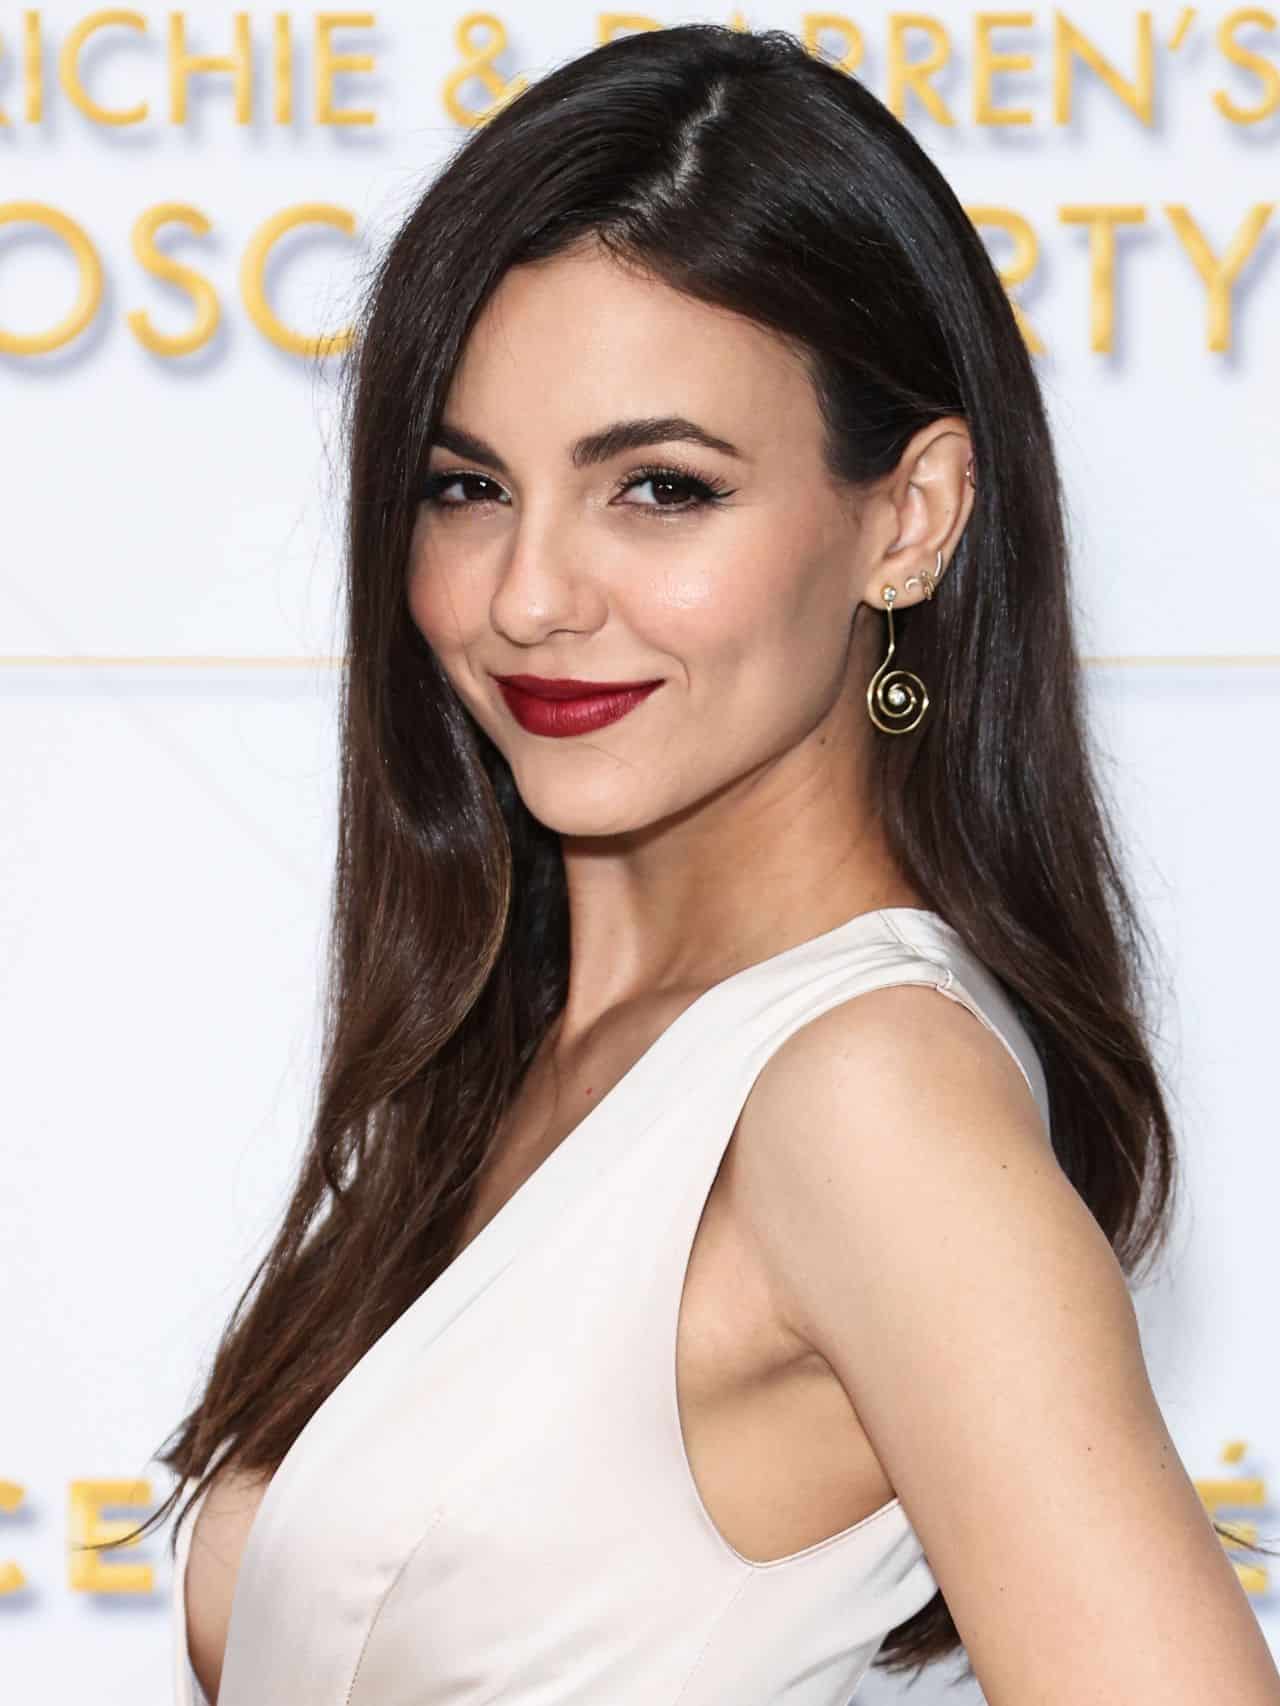 Victoria Justice Turns Heads at Darren and Richie's Oscar Pre-Party